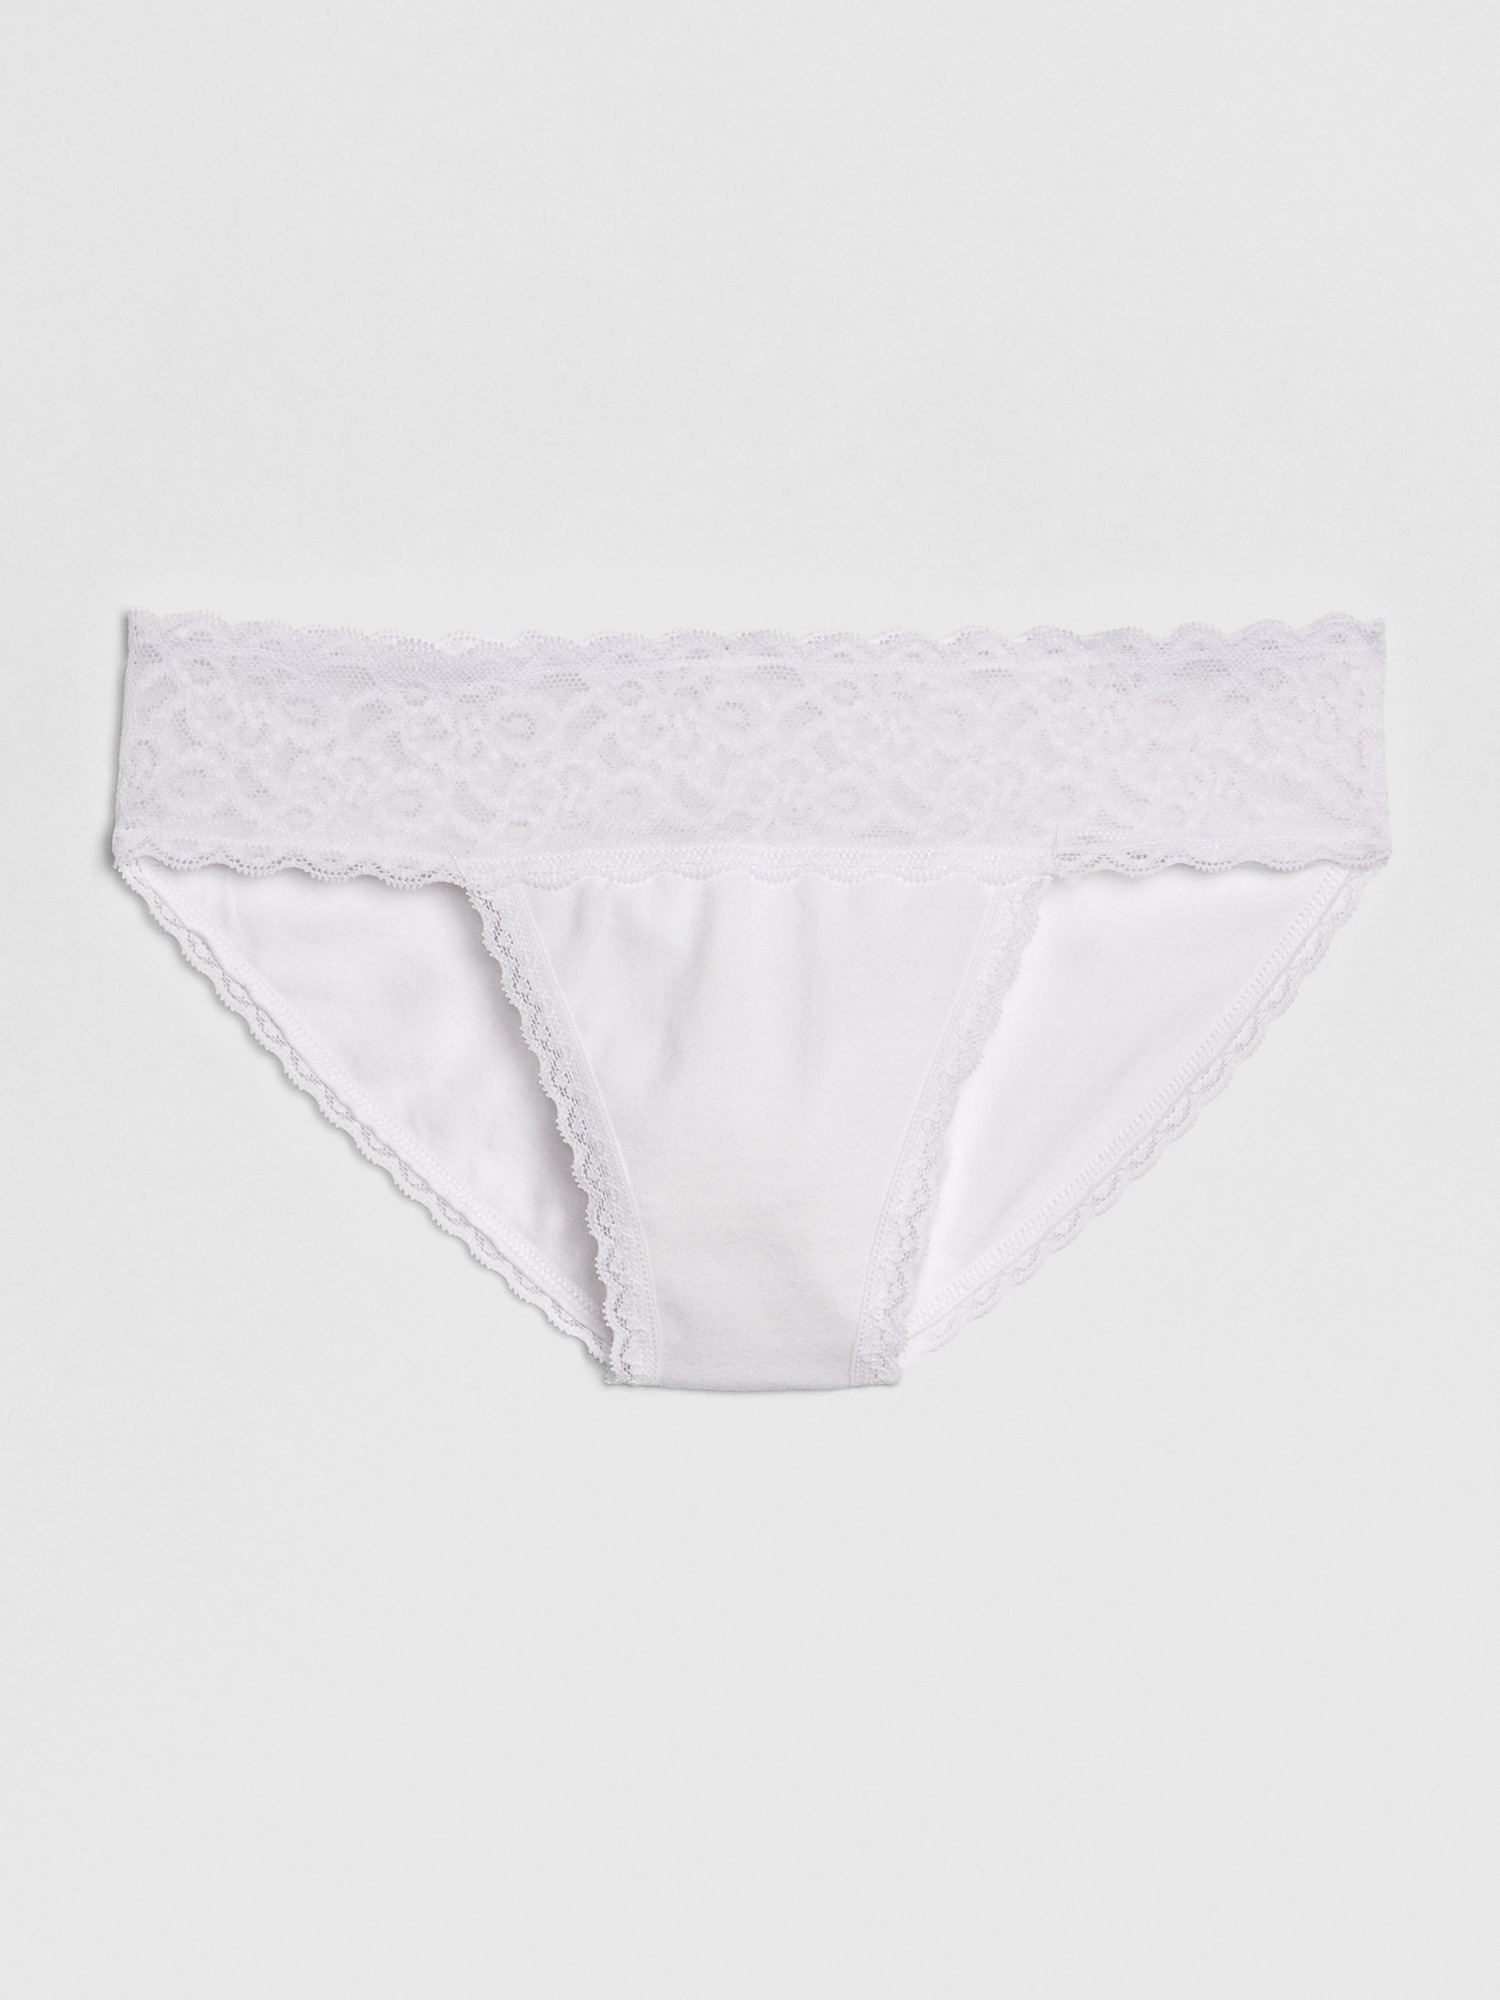 Is it because the crotch of the underwear is pink, - #156547635 added by  hexagony at The Truth About Thigh Gaps